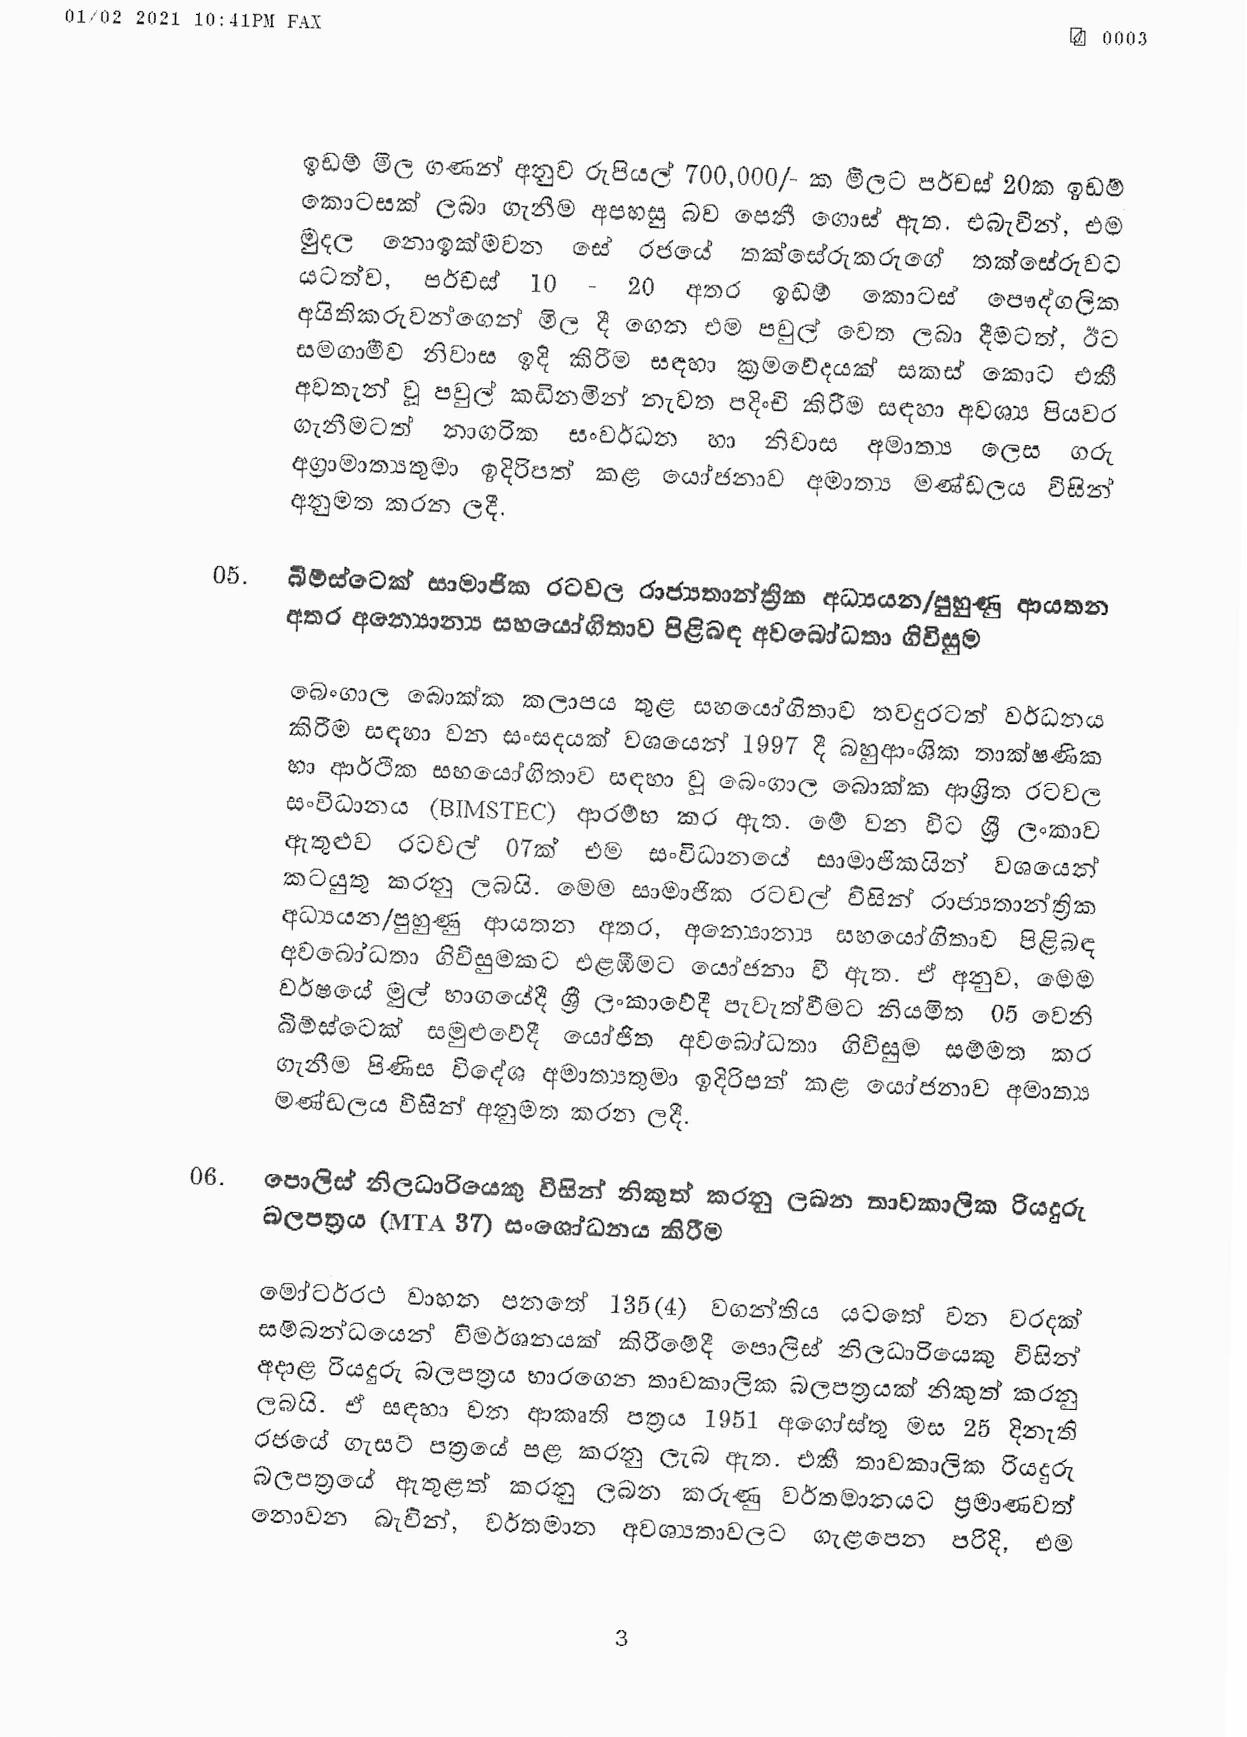 Cabinet Decision on 01.02.2021 page 003